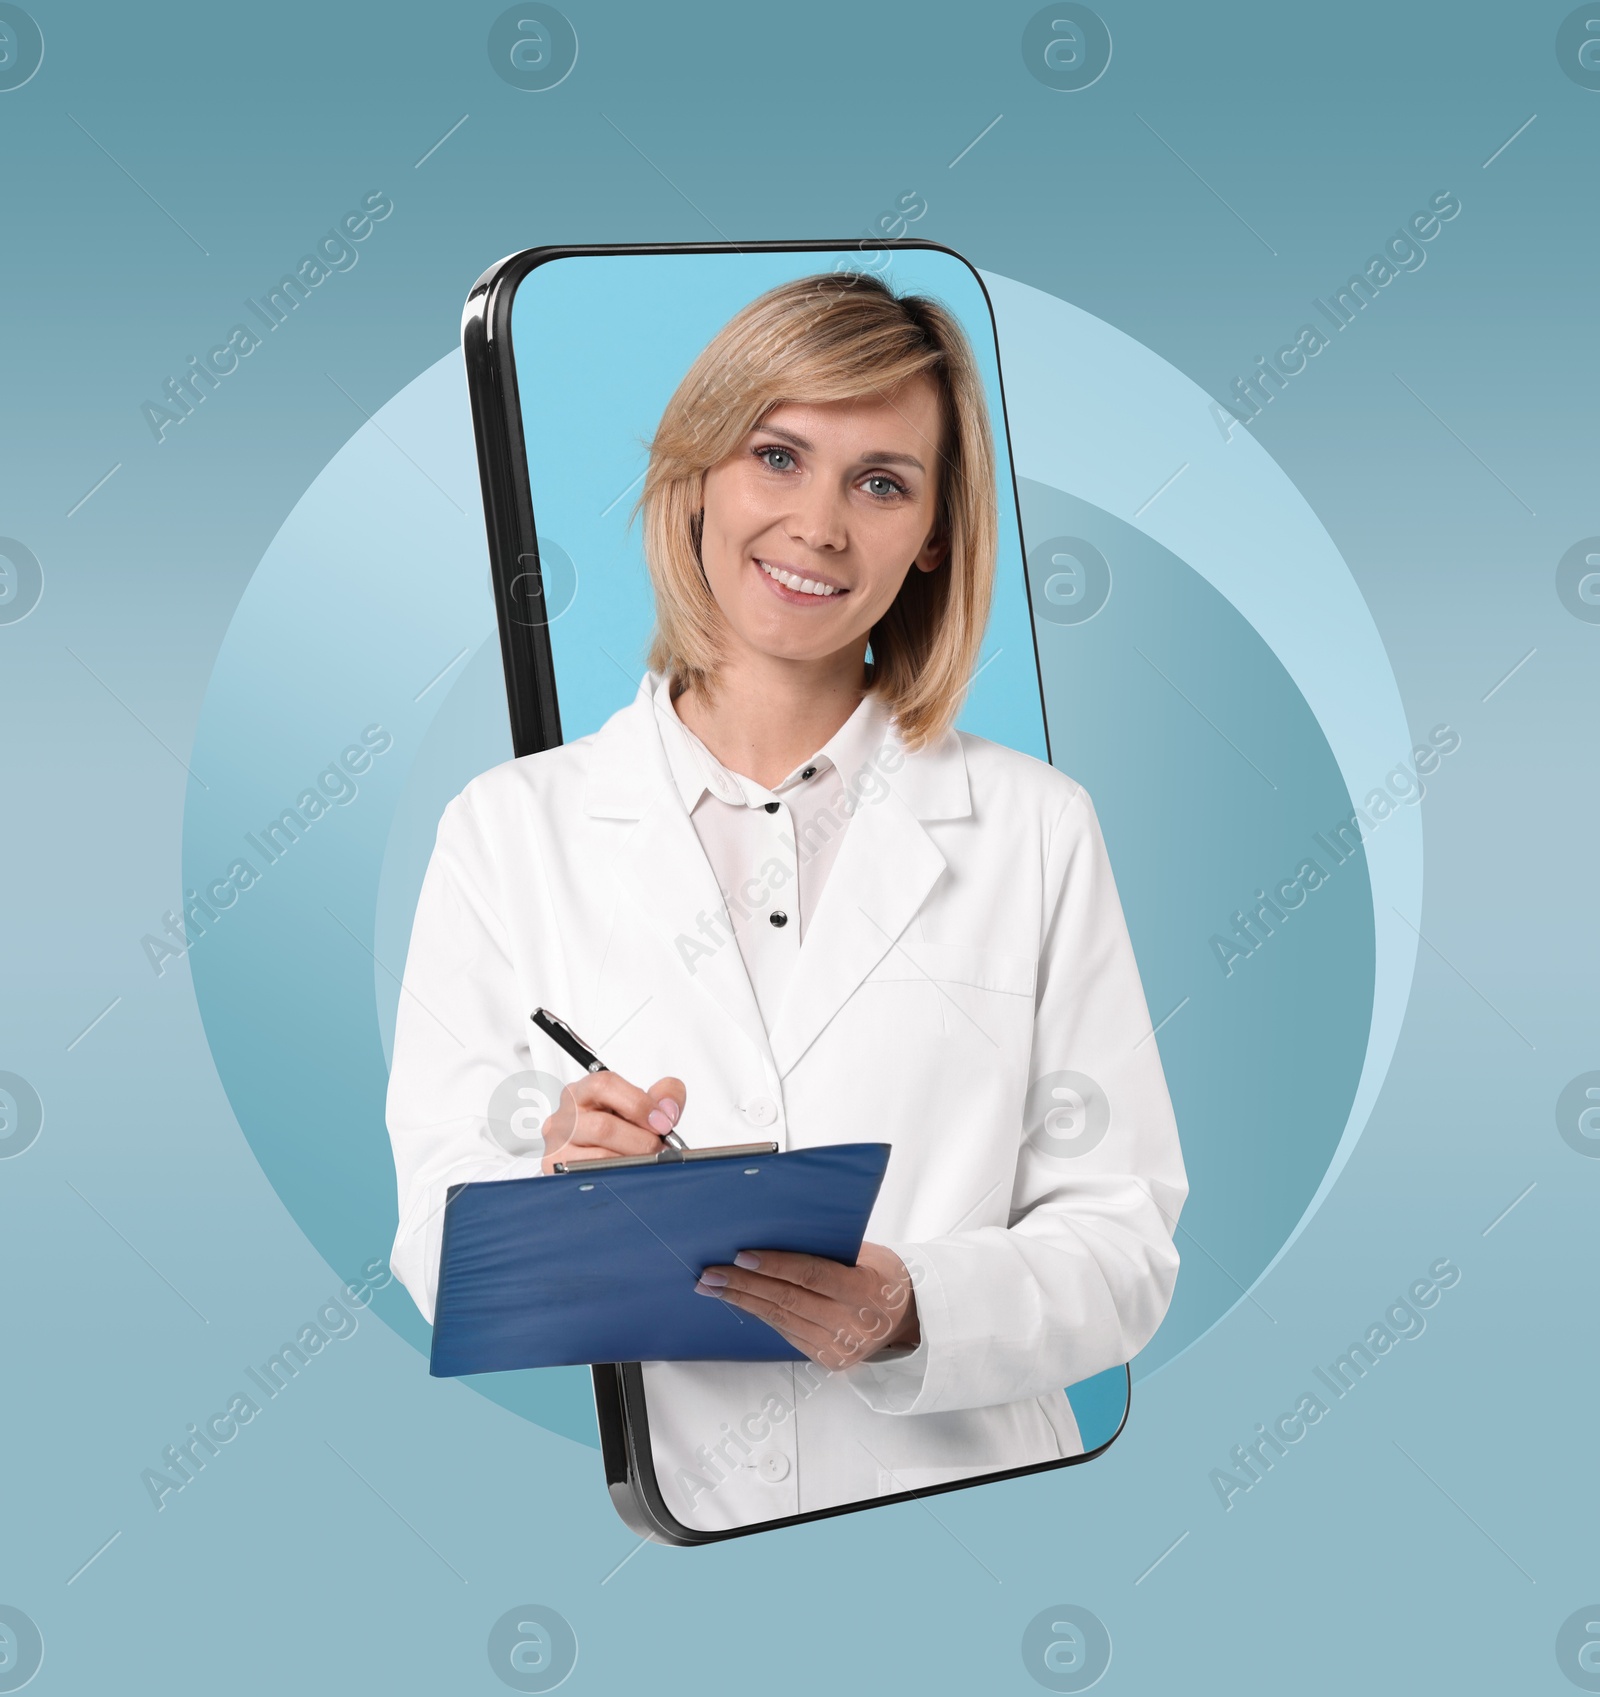 Image of Online medical consultation. Doctor with clipboard on smartphone screen against light blue background